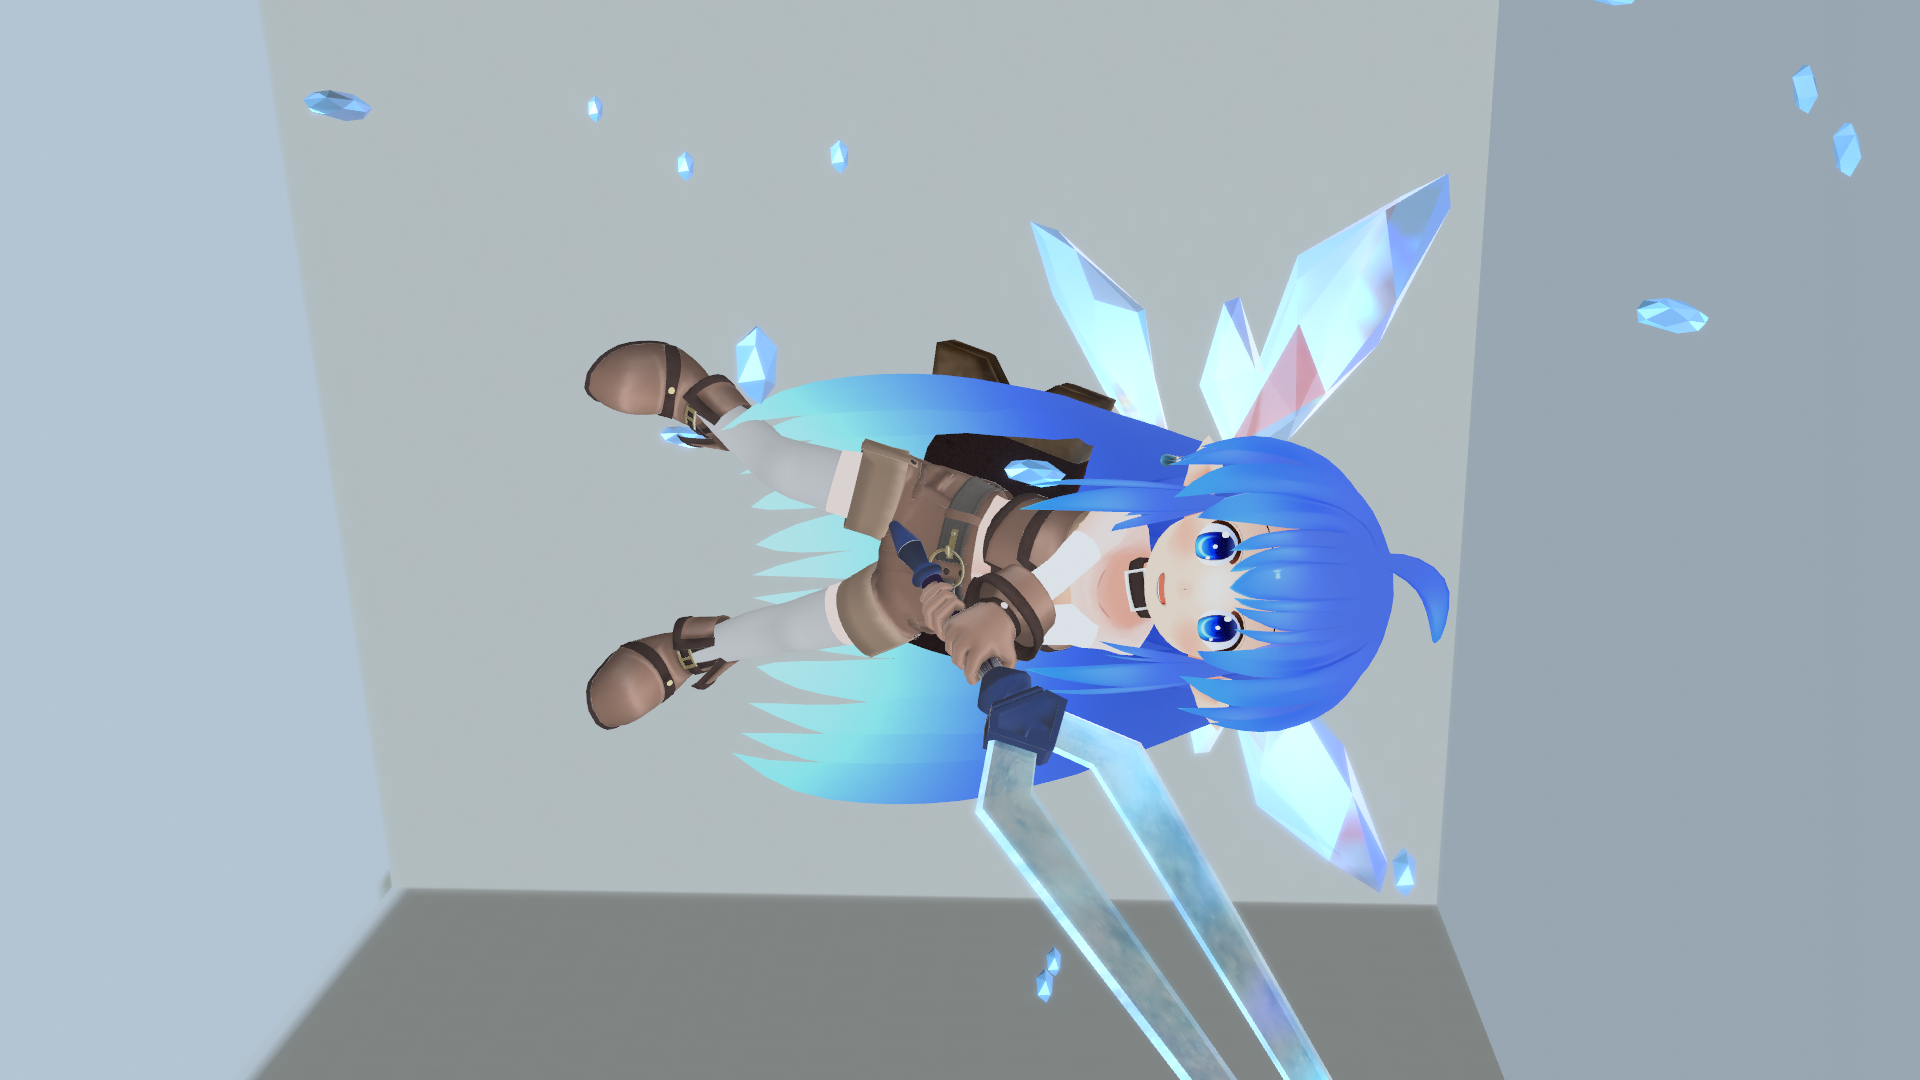 VRChat_1920x1080_2021-12-05_04-54-48.819.png